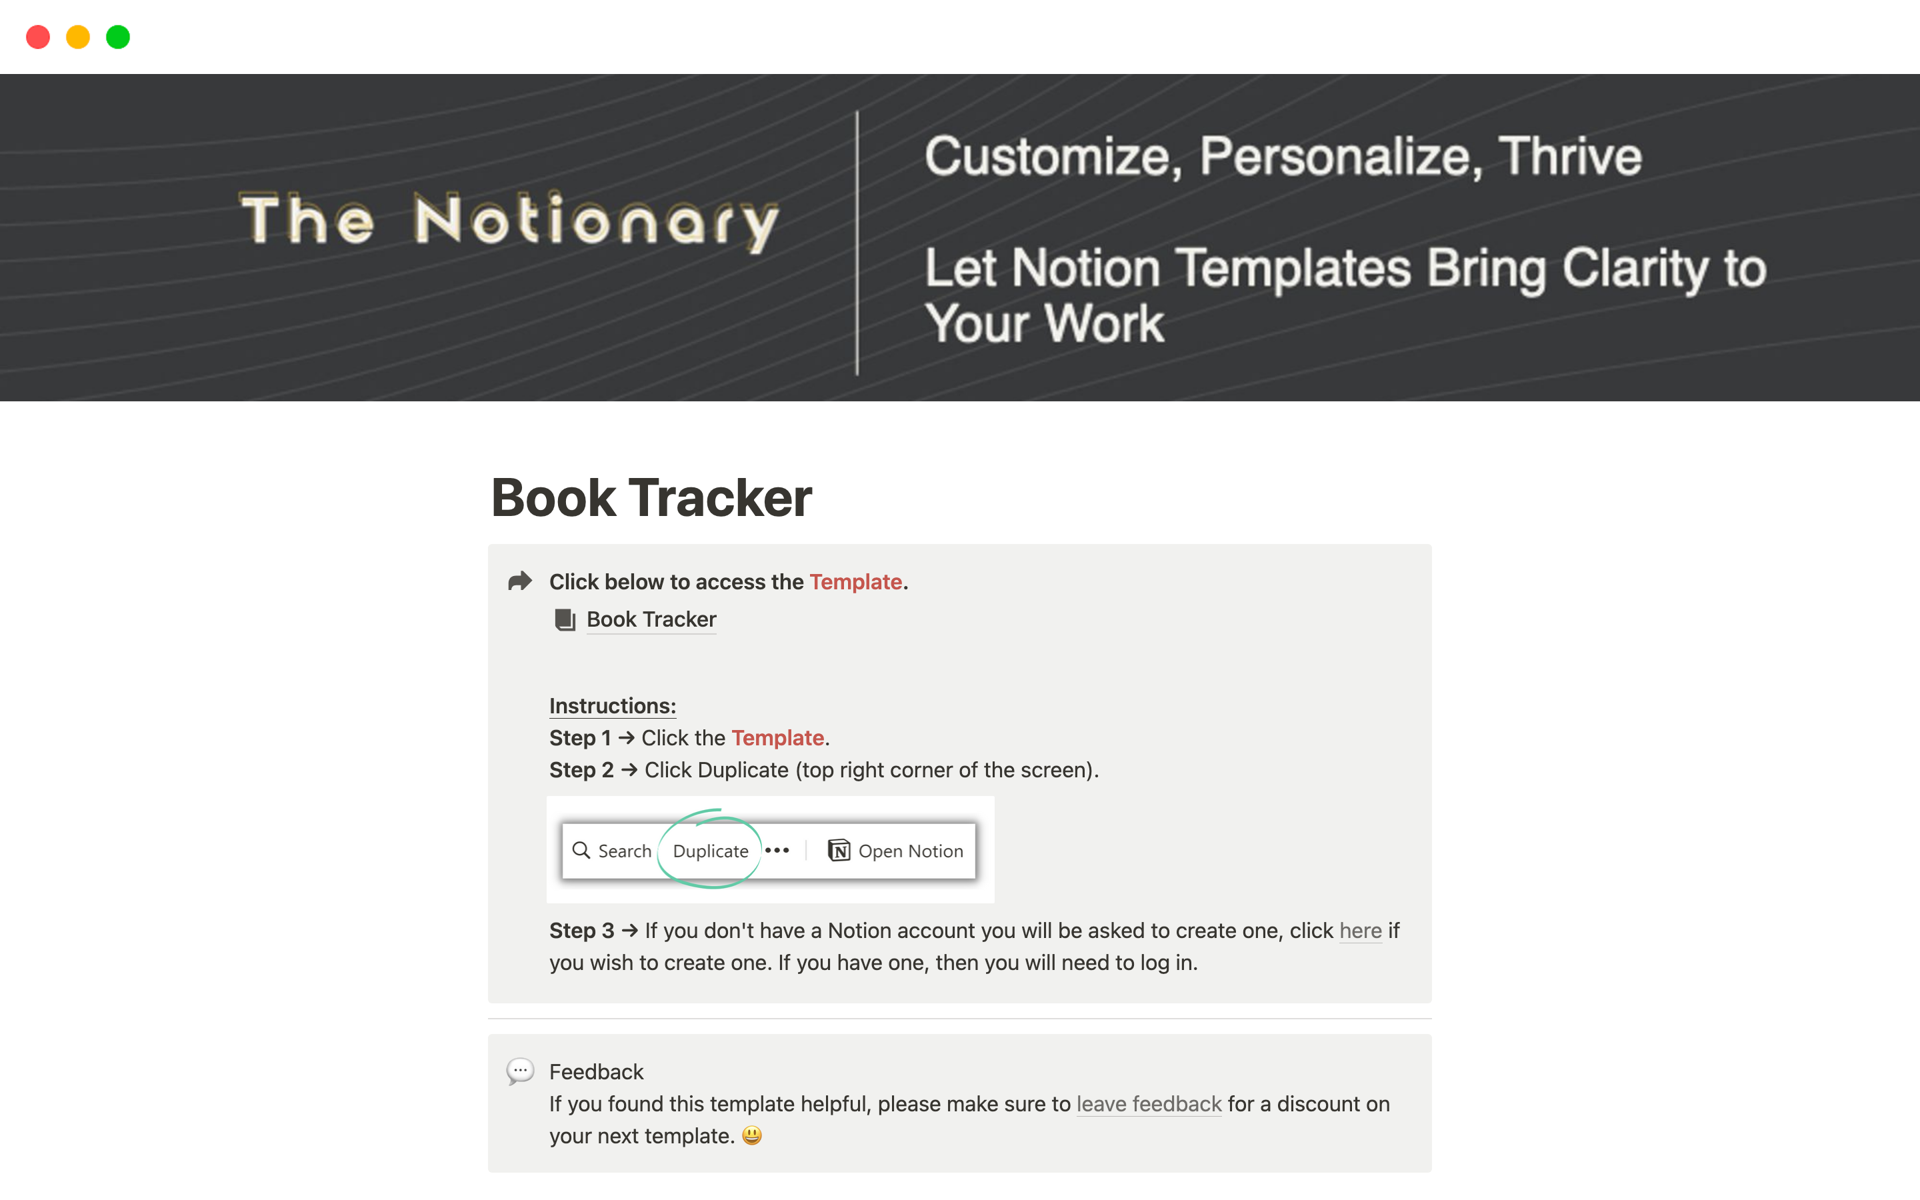 The Book Tracker Notion template is designed to help users organize their book collection and reading experience. It is a comprehensive tool that allows users to keep track of their books and their reading progress, as well as their favorite quotes and genres.